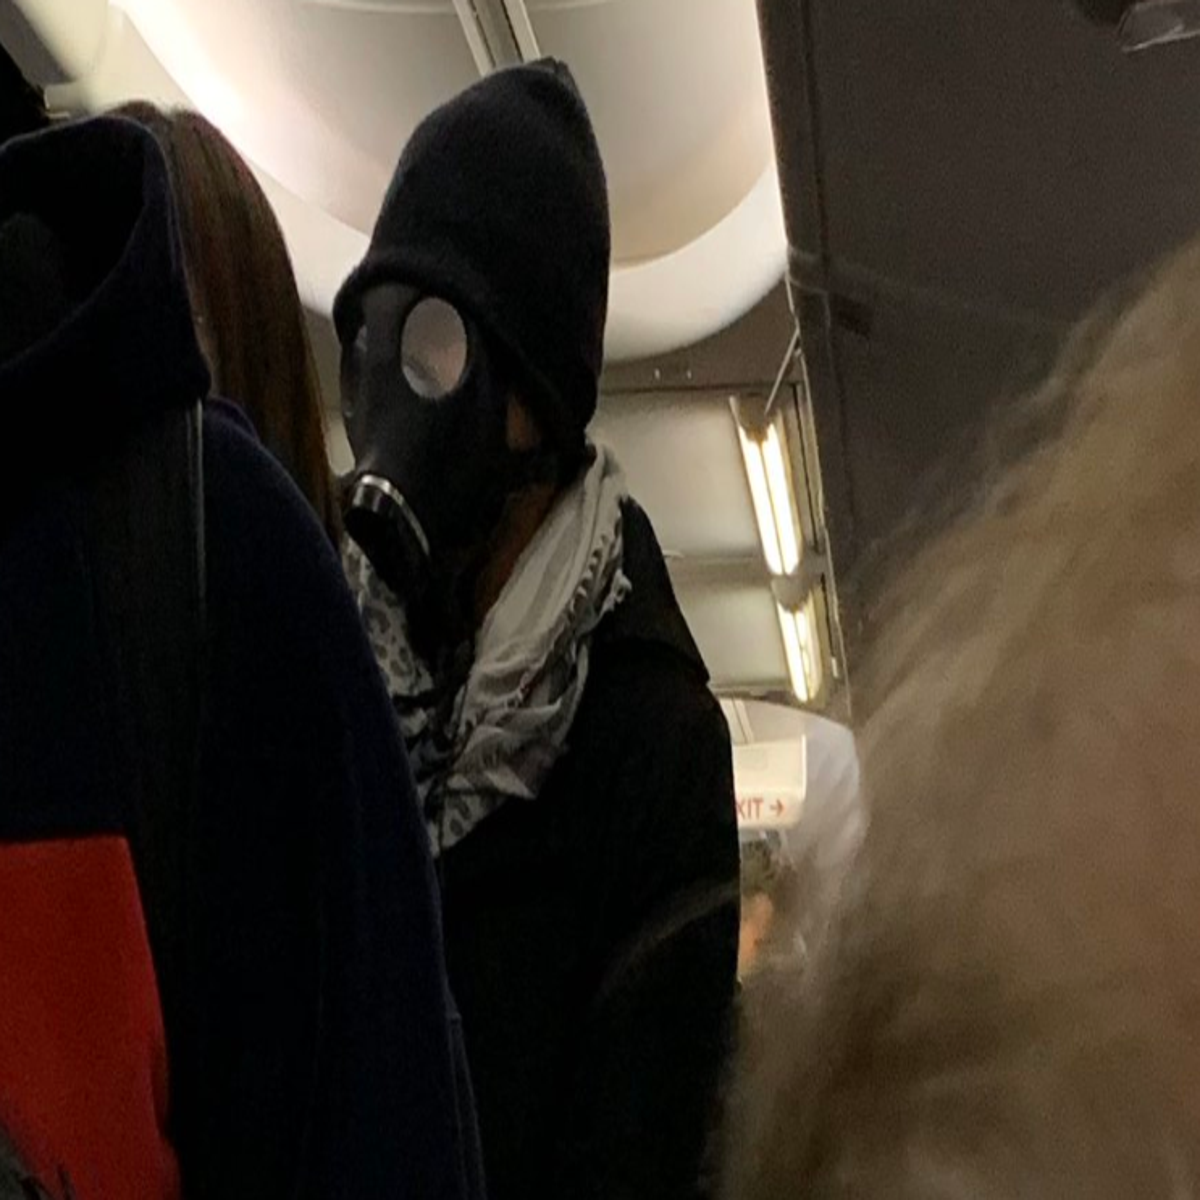 kicked flight for military-style gas mask | The Independent The Independent